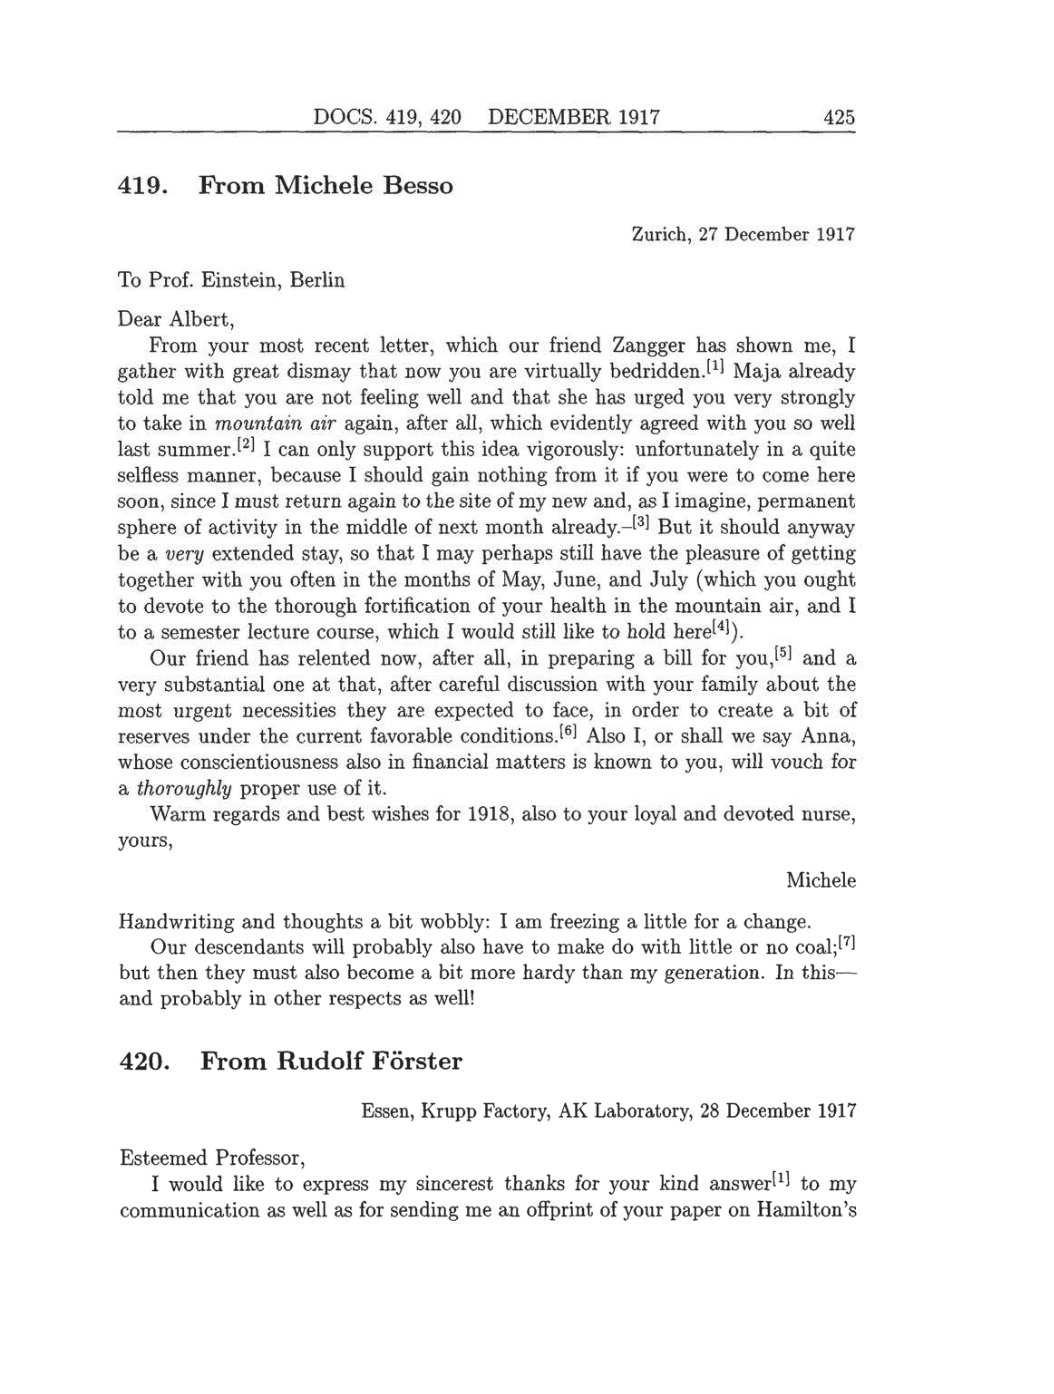 Volume 8: The Berlin Years: Correspondence, 1914-1918 (English translation supplement) page 425